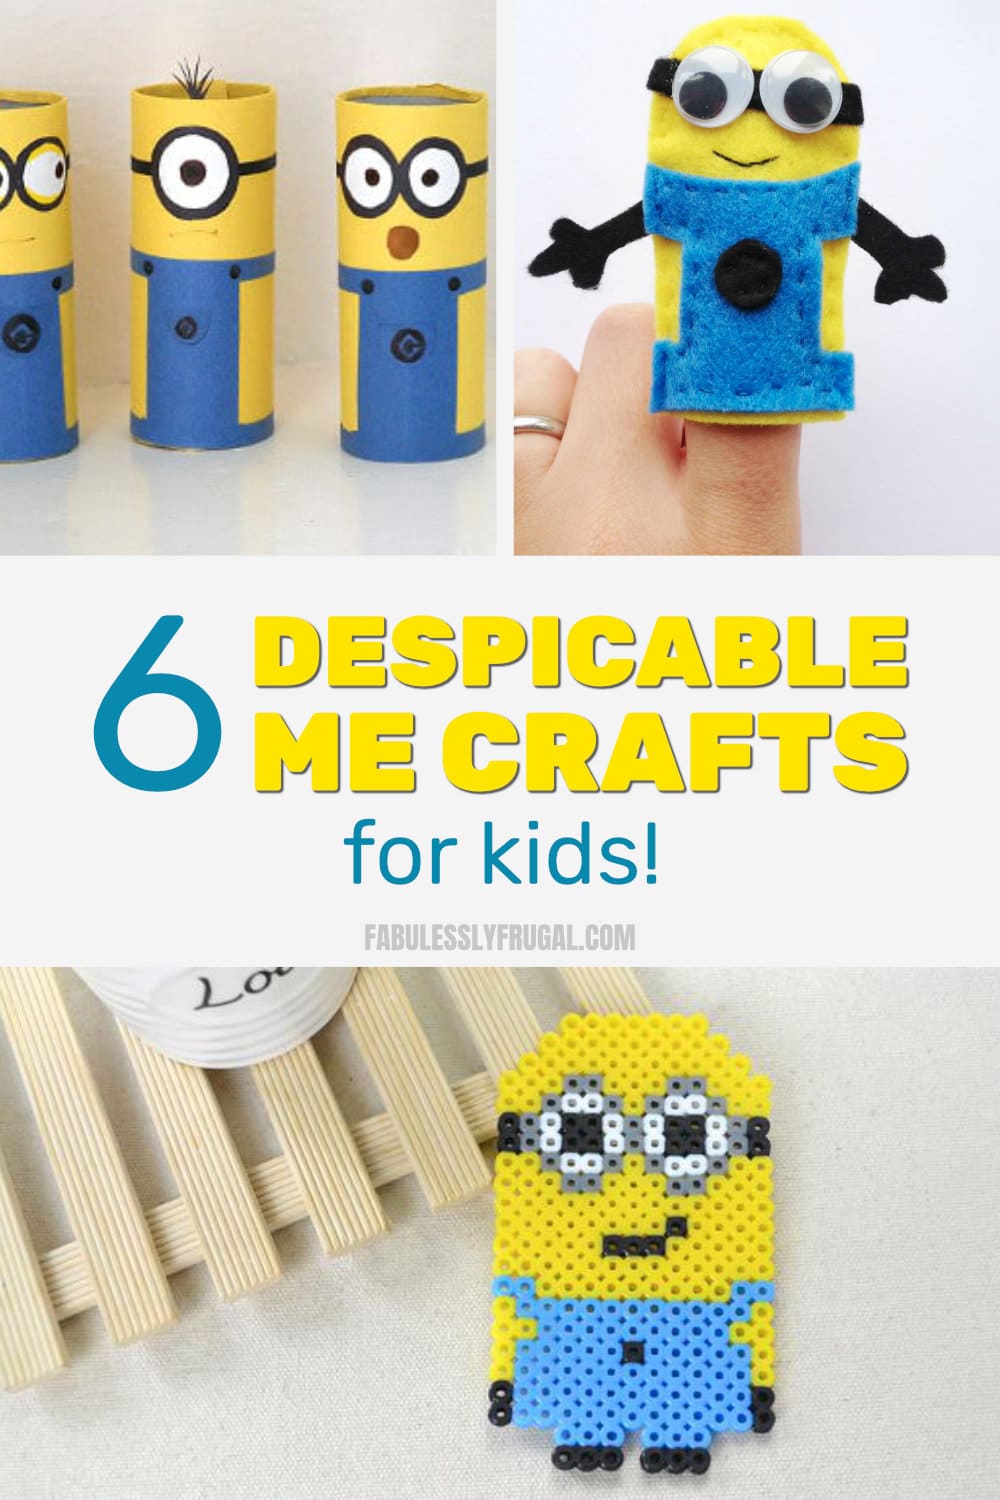 Despicable me crafts for kids